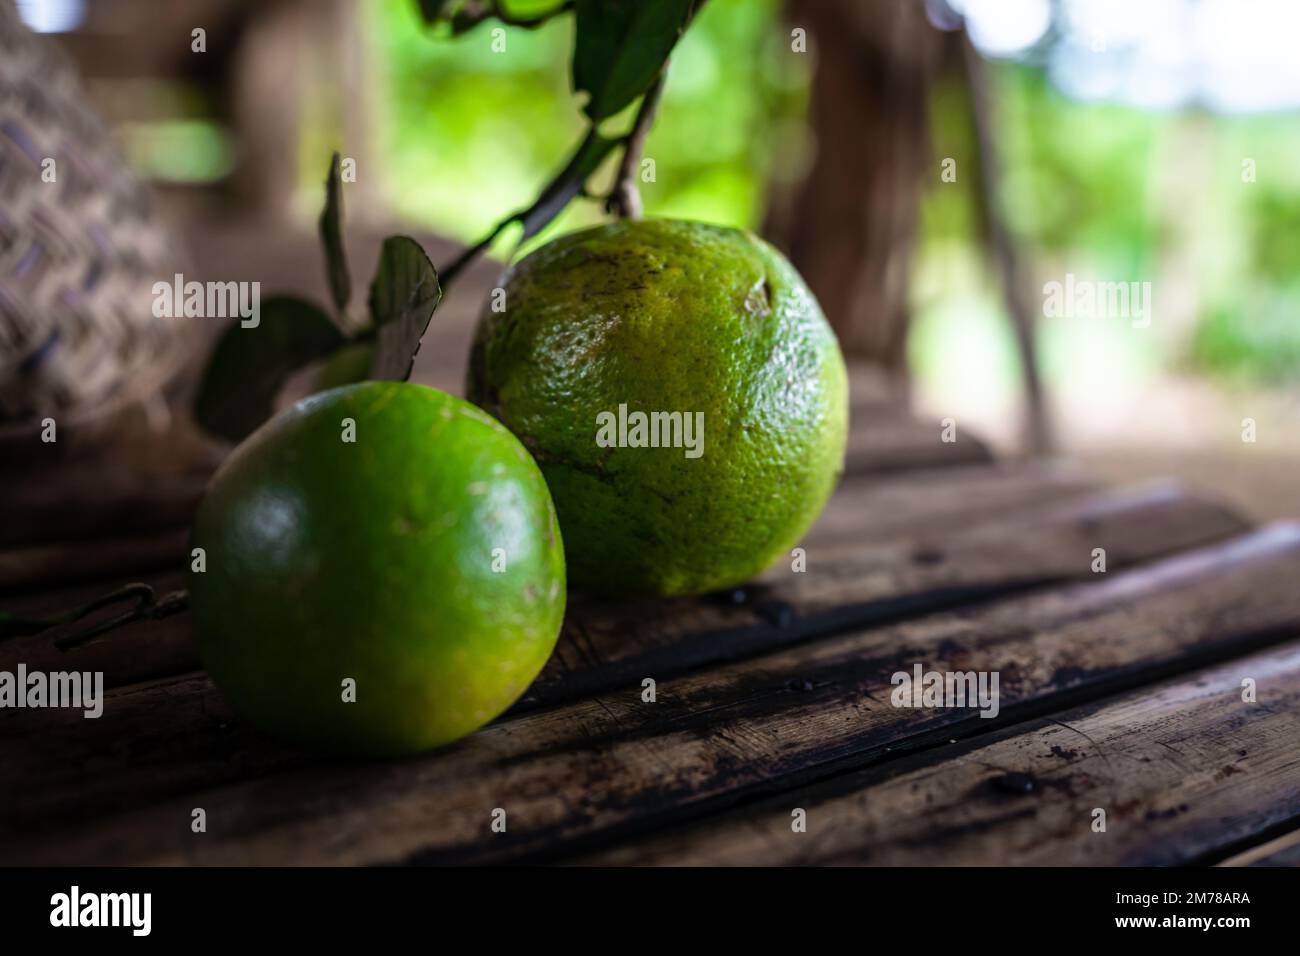 Green citrus freshly picked from the tree. Stock Photo